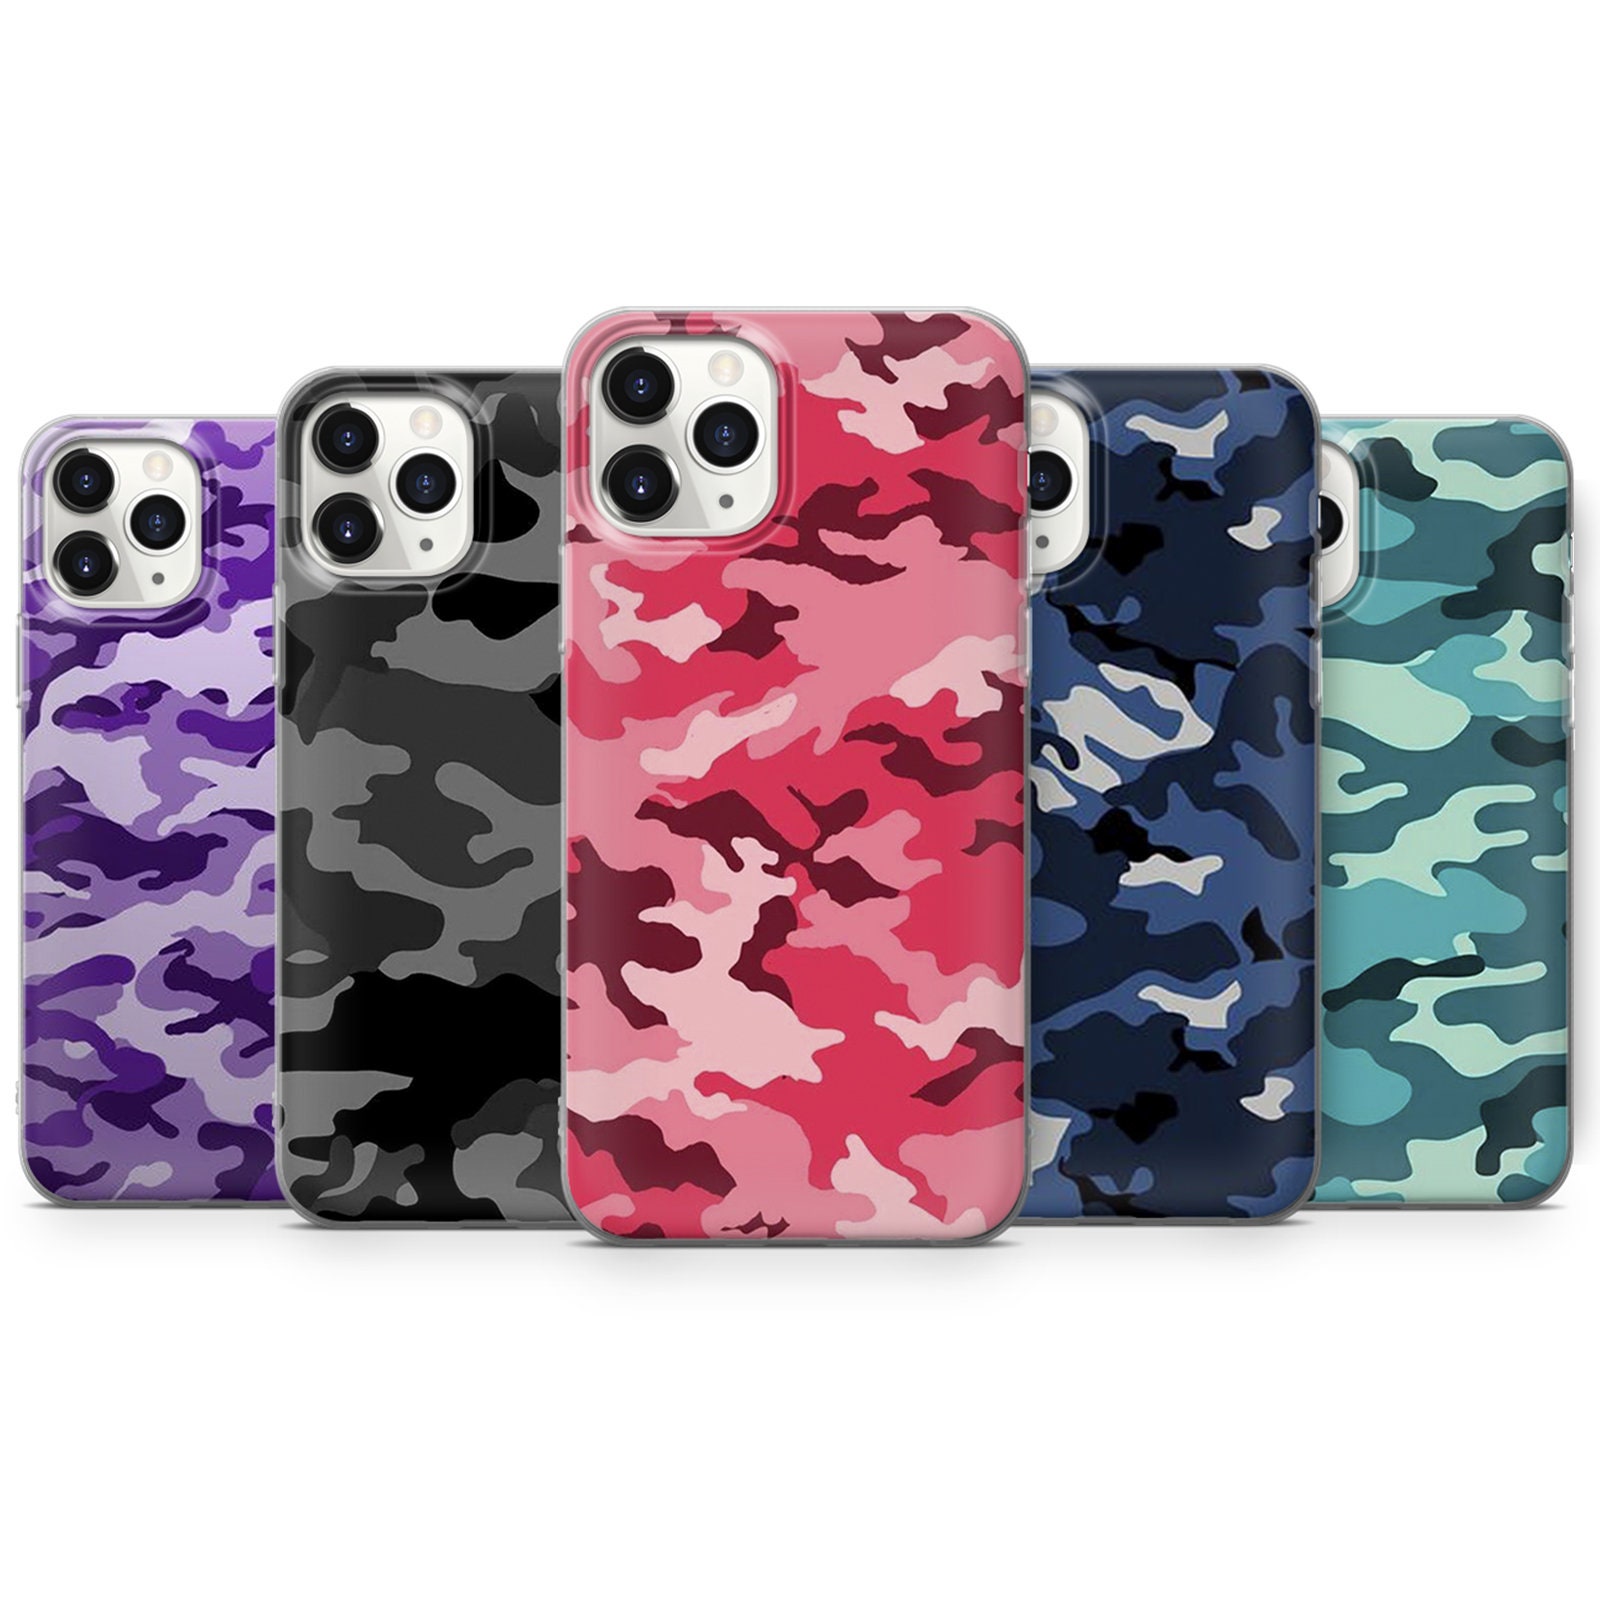 Arma 3 iPhone Cases for Sale